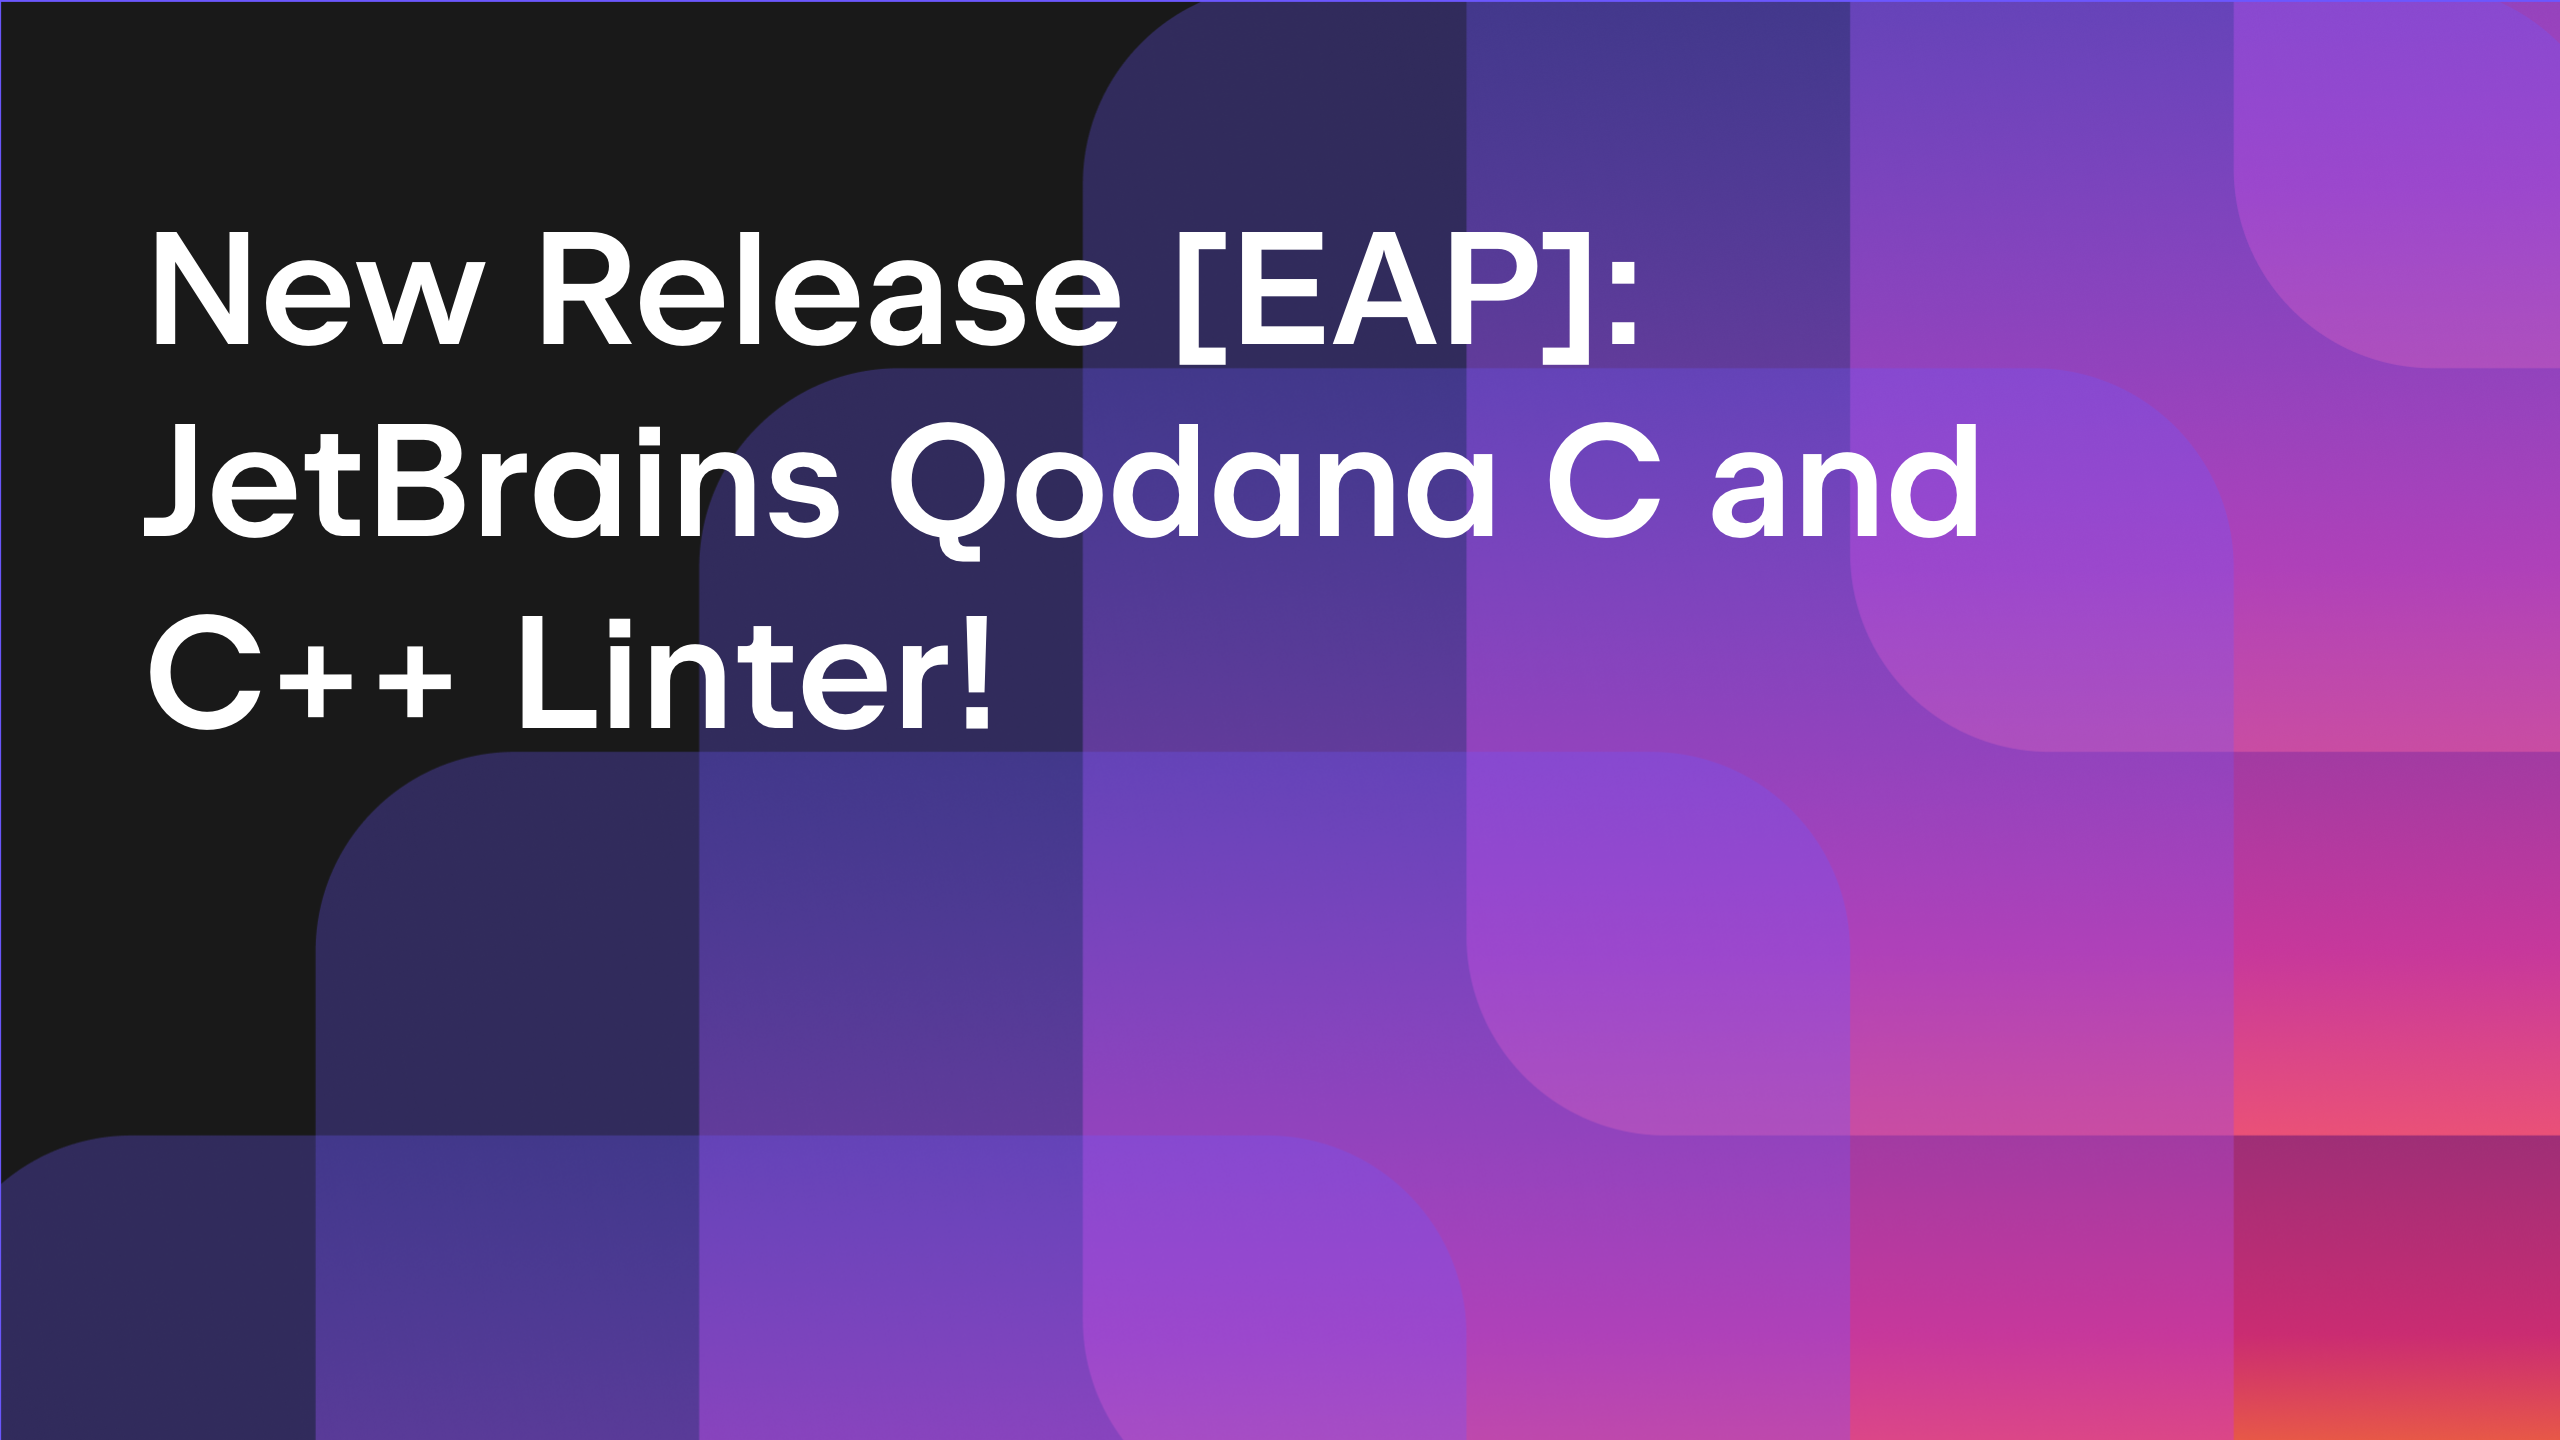 Qodana and c and c++ linters for better code quality.